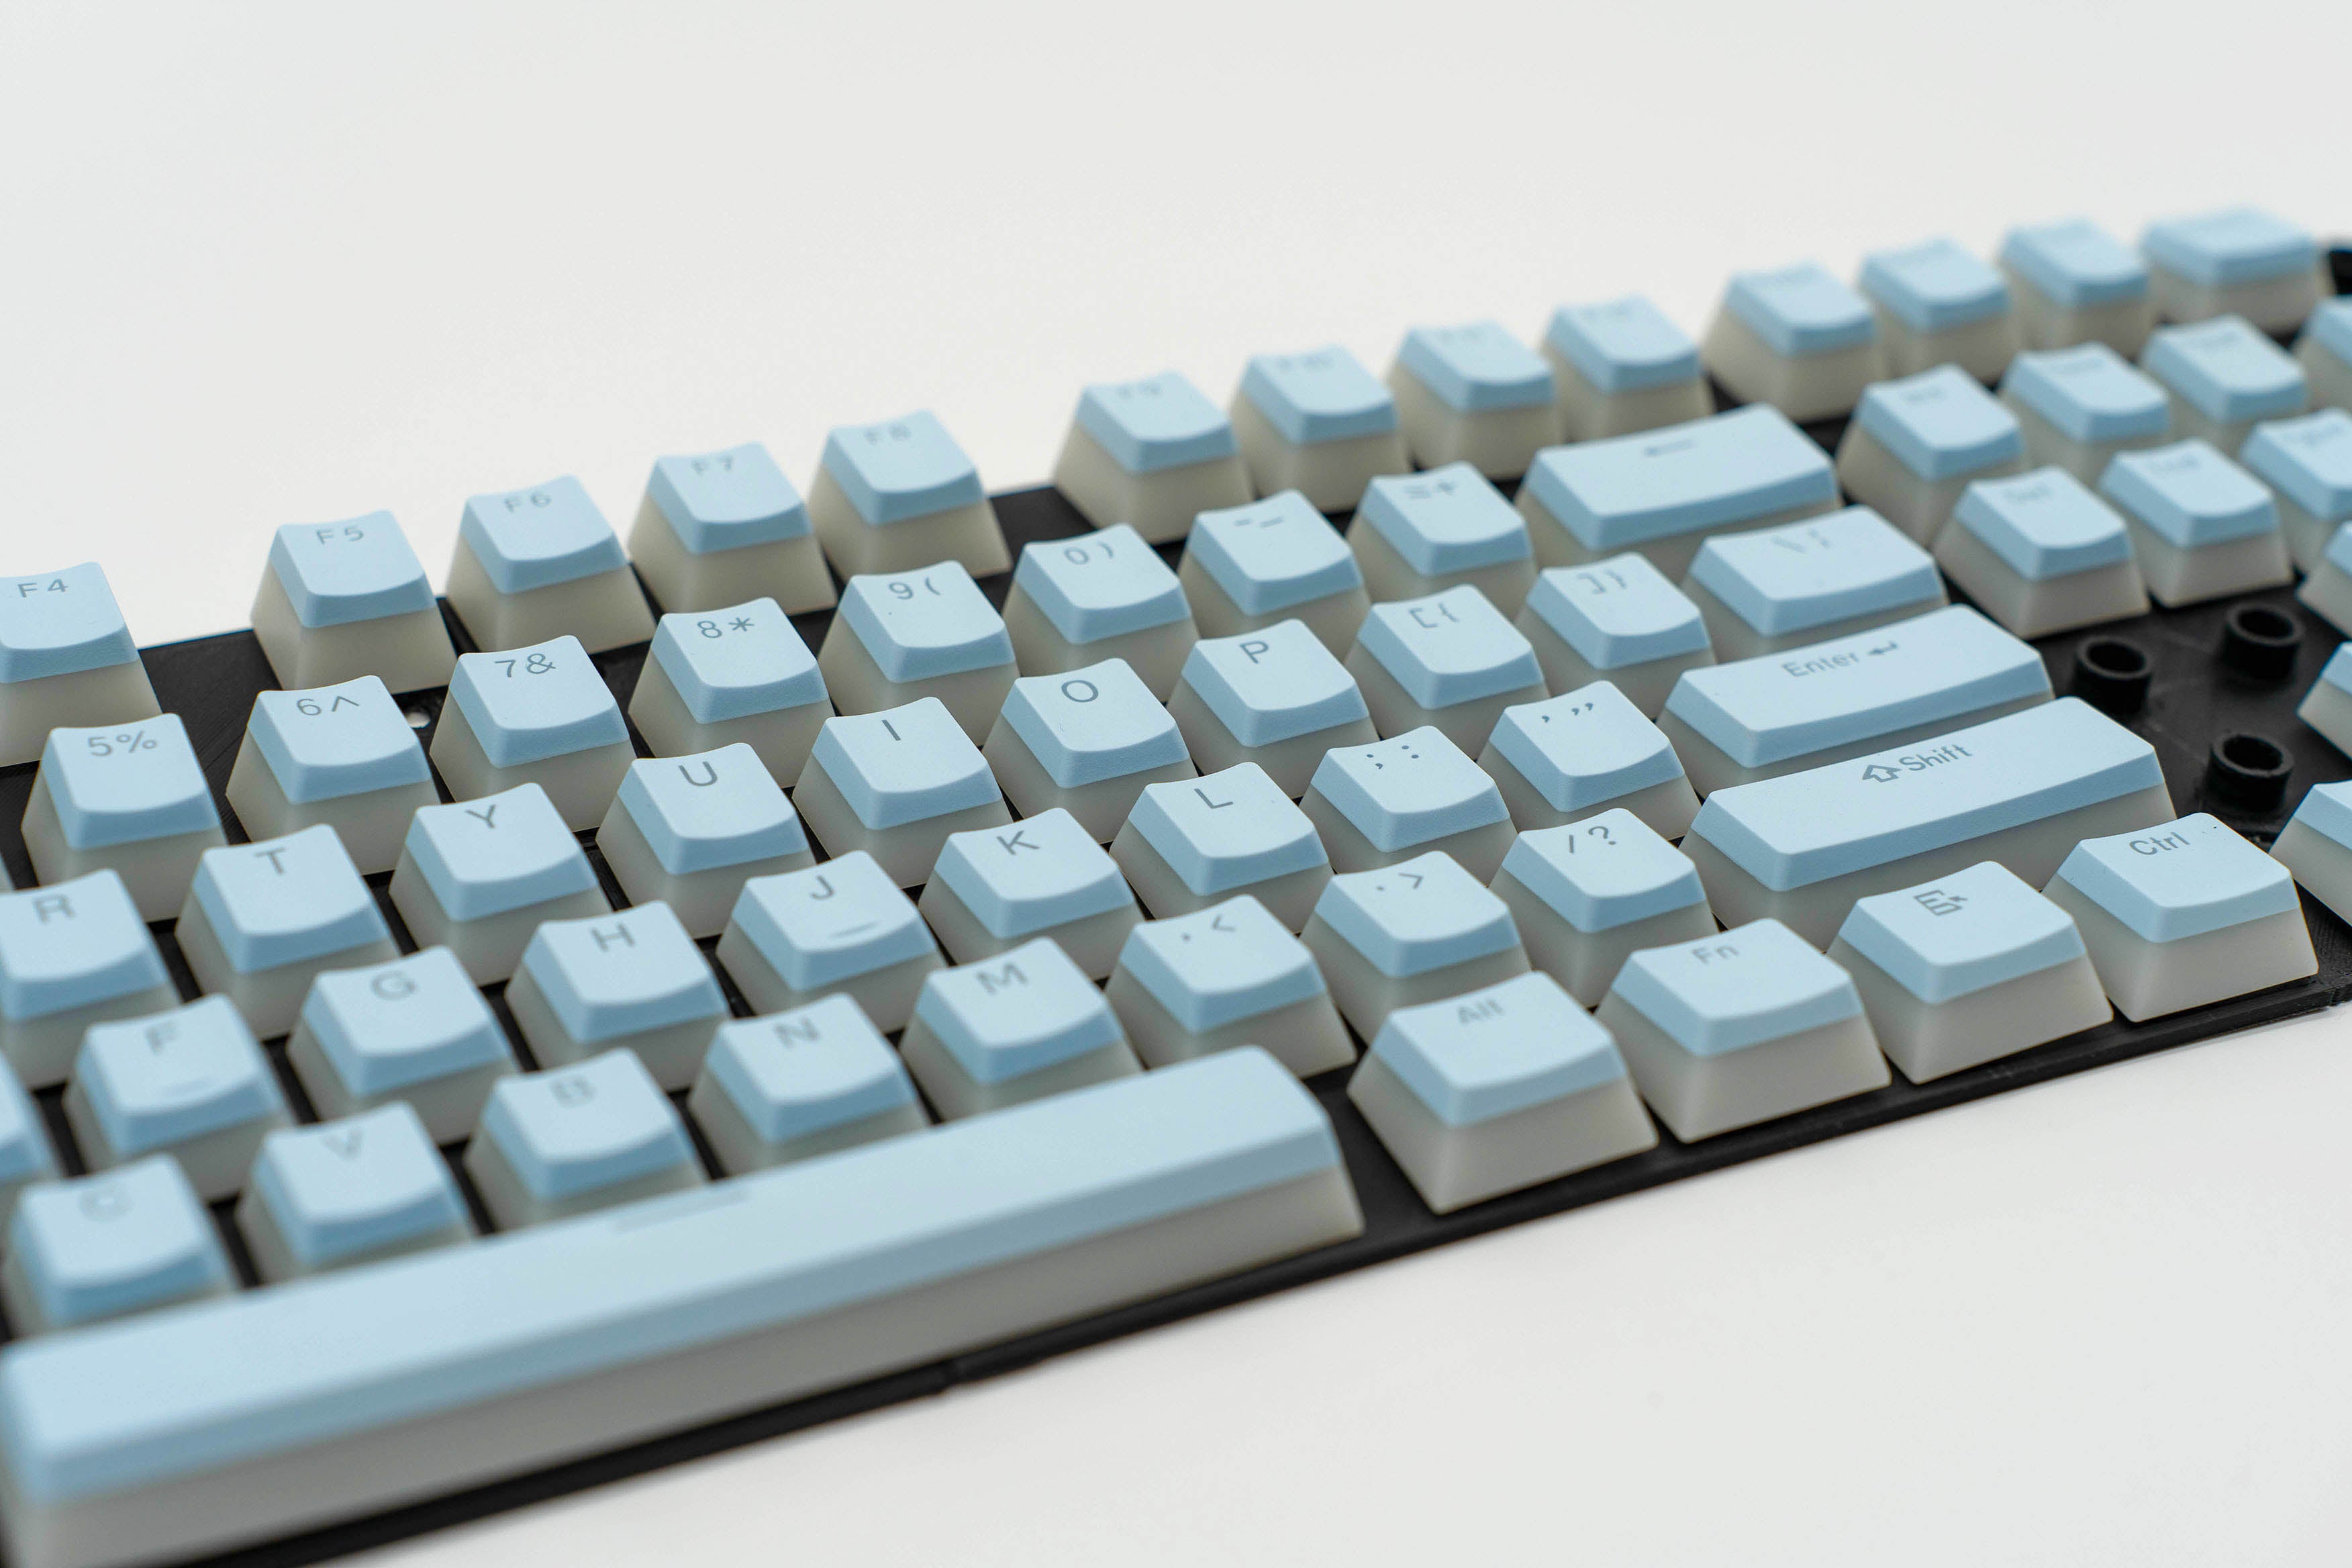 Blue Pudding Keycaps side view full set